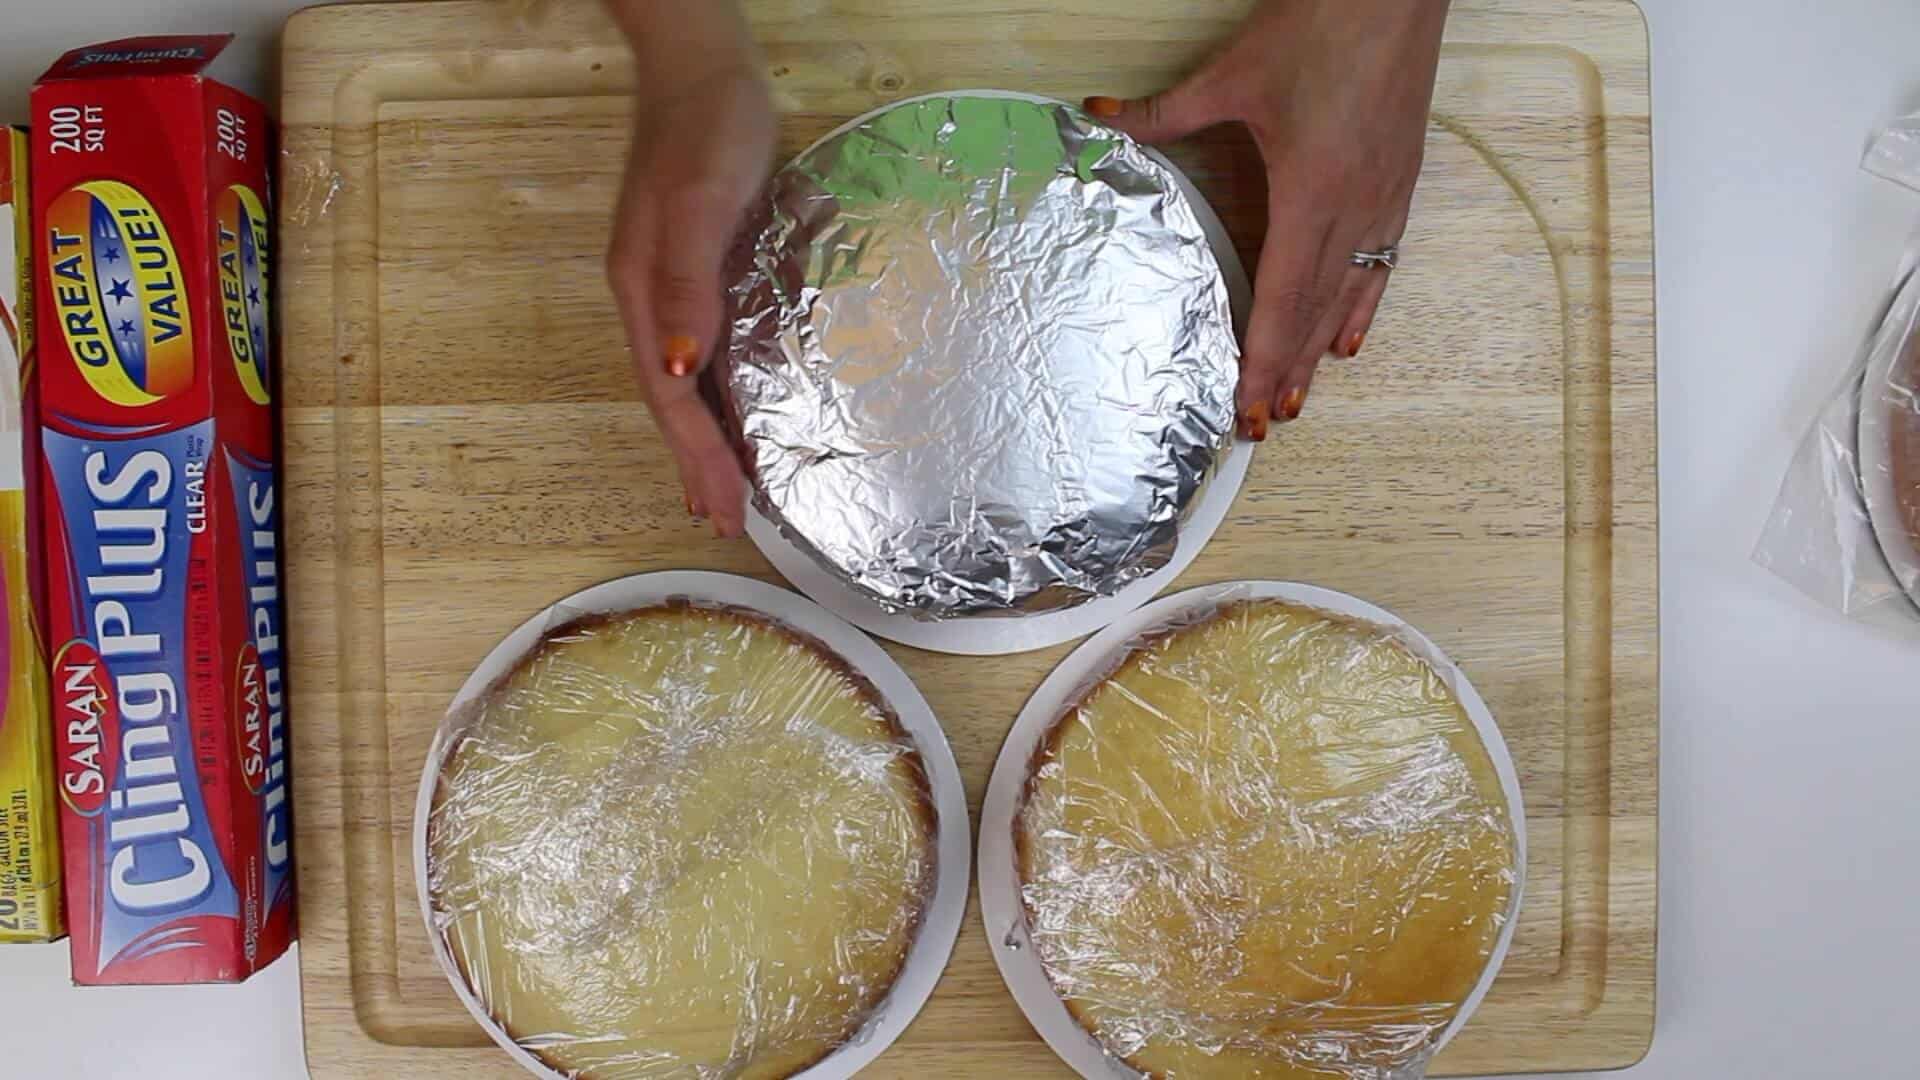 https://chelsweets.com/wp-content/uploads/2018/10/wrapped-cake-layer-on-foil.jpg